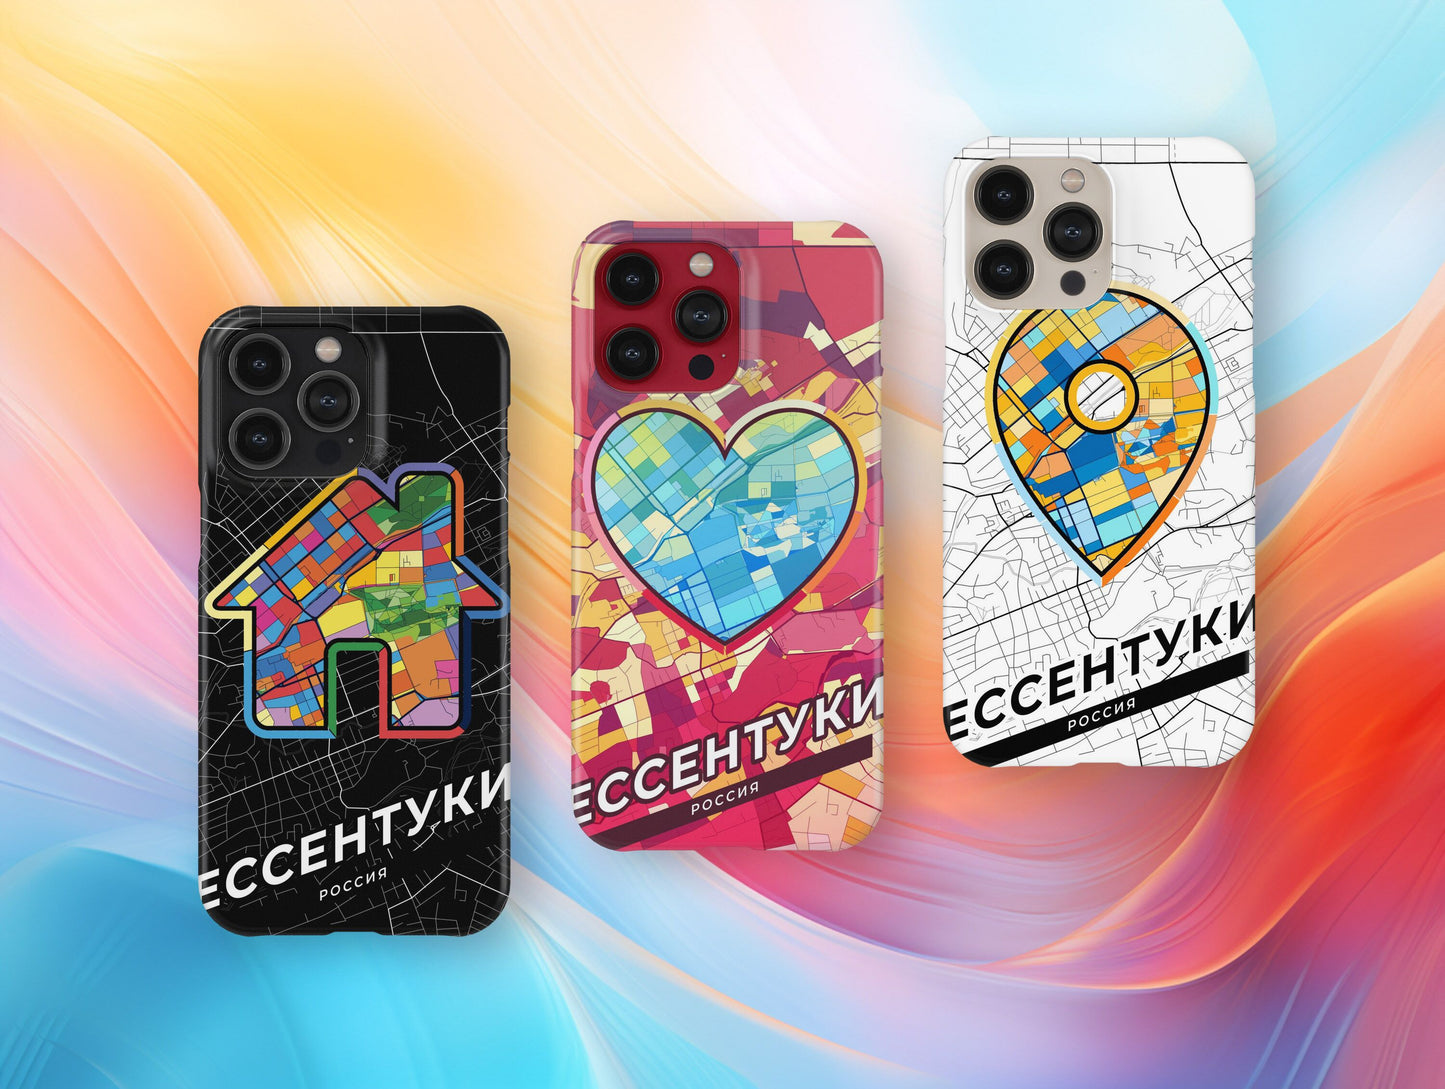 Yessentuki Russia slim phone case with colorful icon